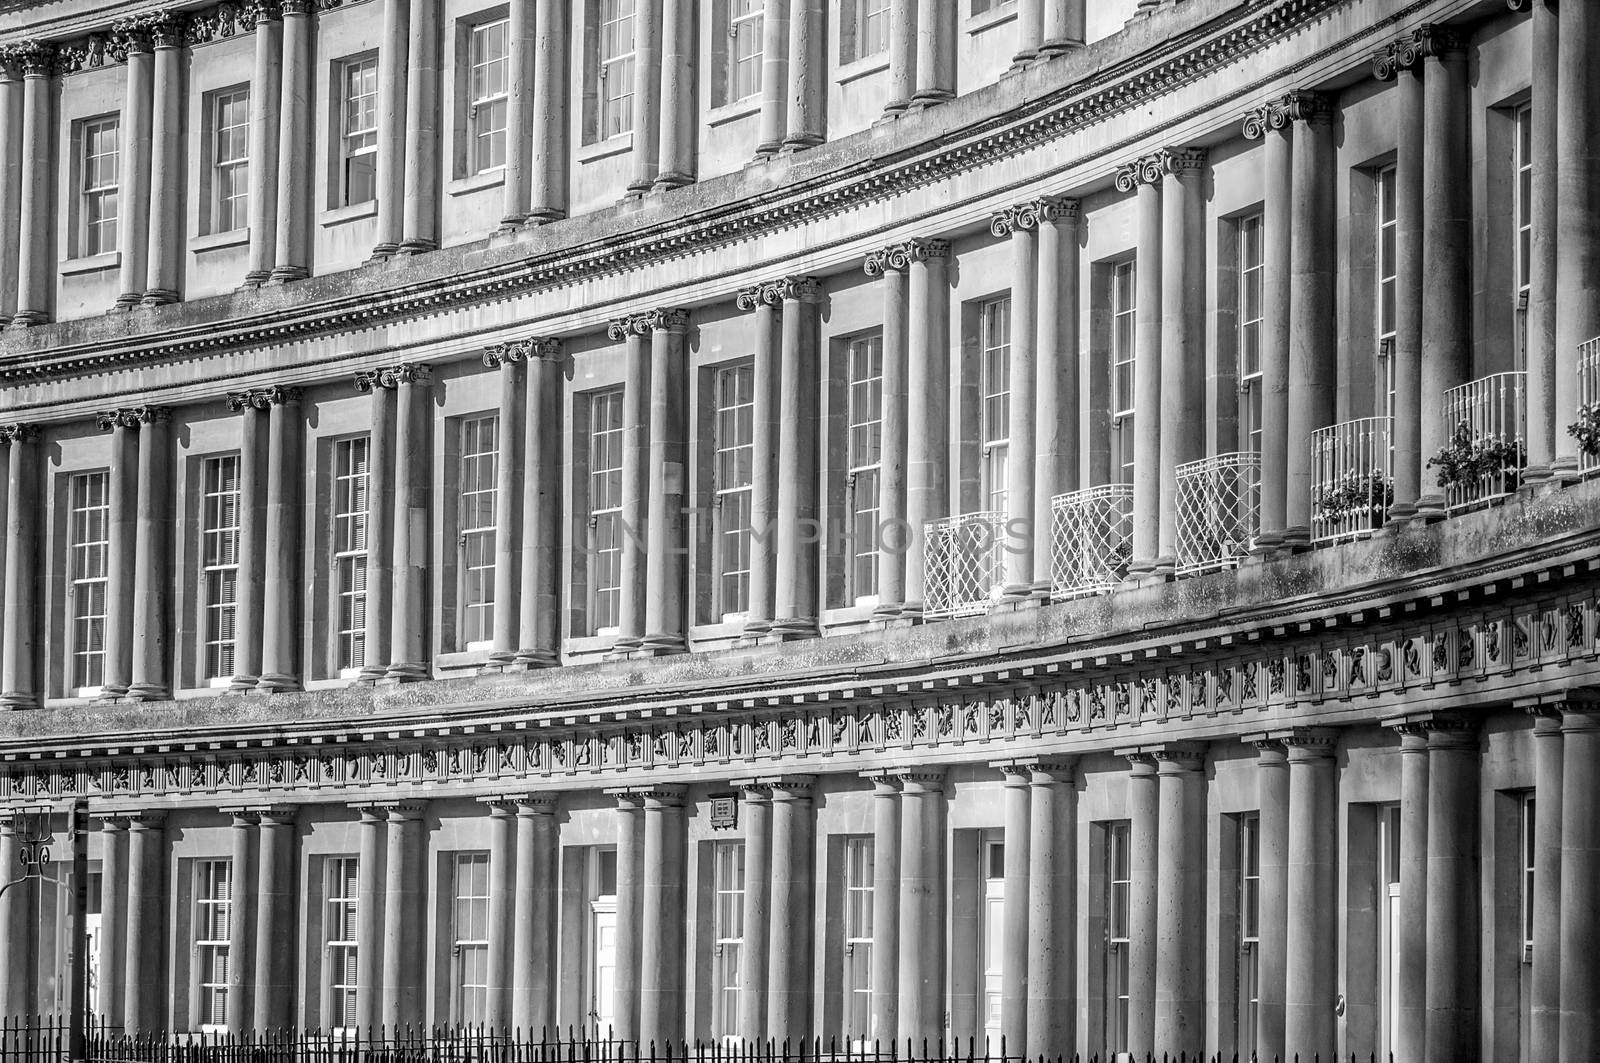 The curved facade of The Circus, one of the chief tourist attractions in the city of Bath in England by sirspread